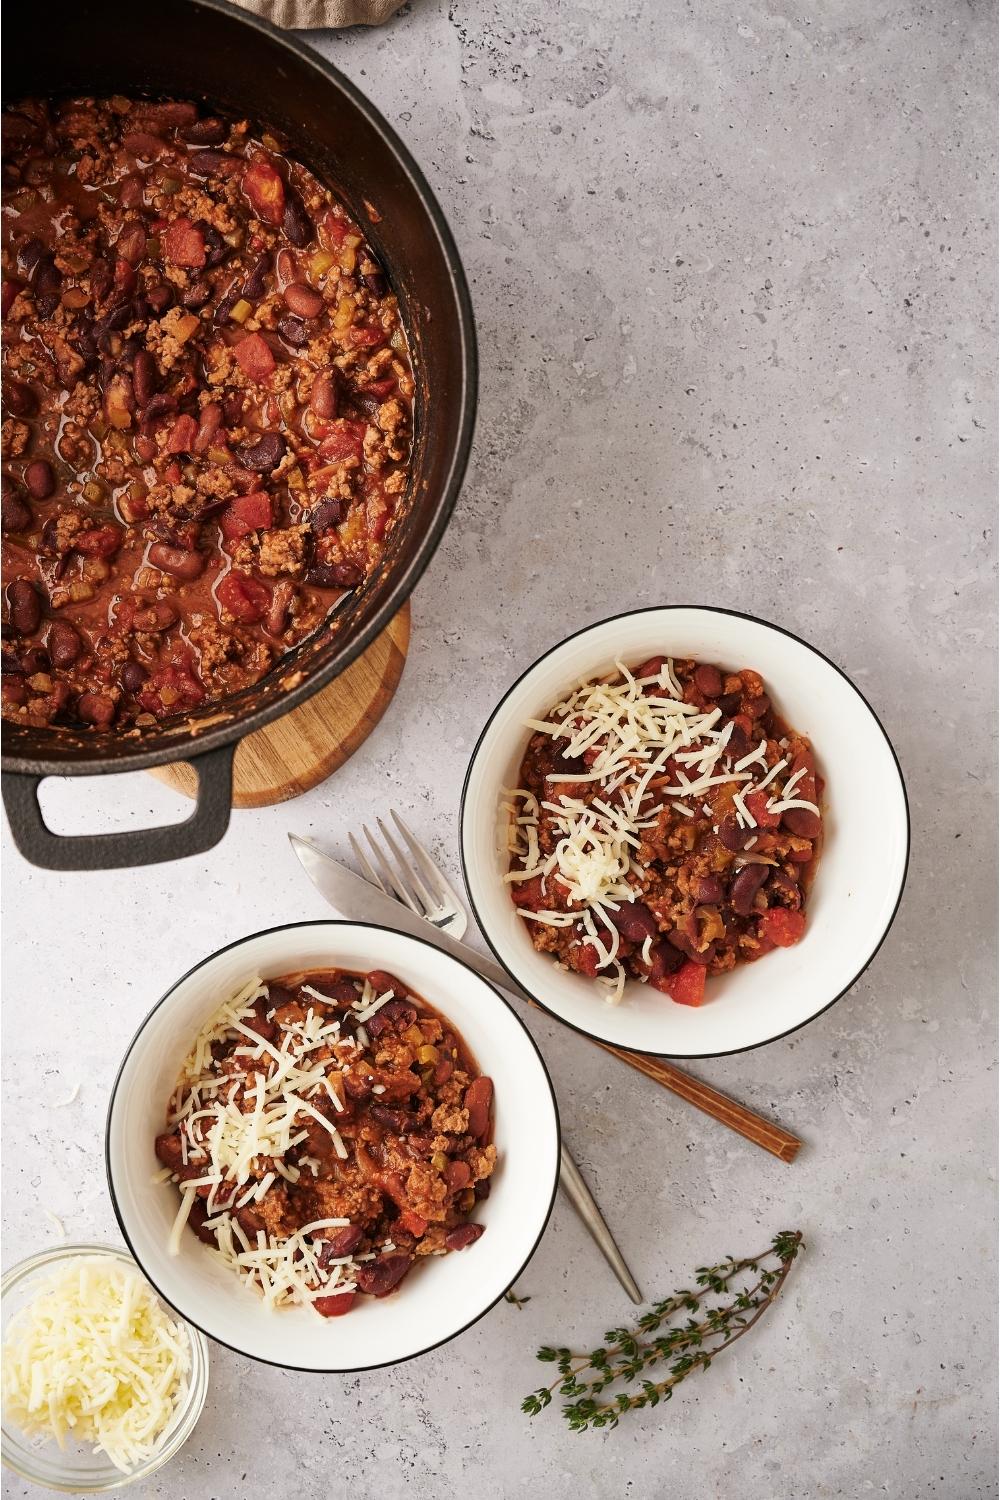 Two bowls of chili on a grey counter with a fork and knife, dried sprigs of thyme, a small bowl of cheese, and a large pot of chili resting on a wood board.